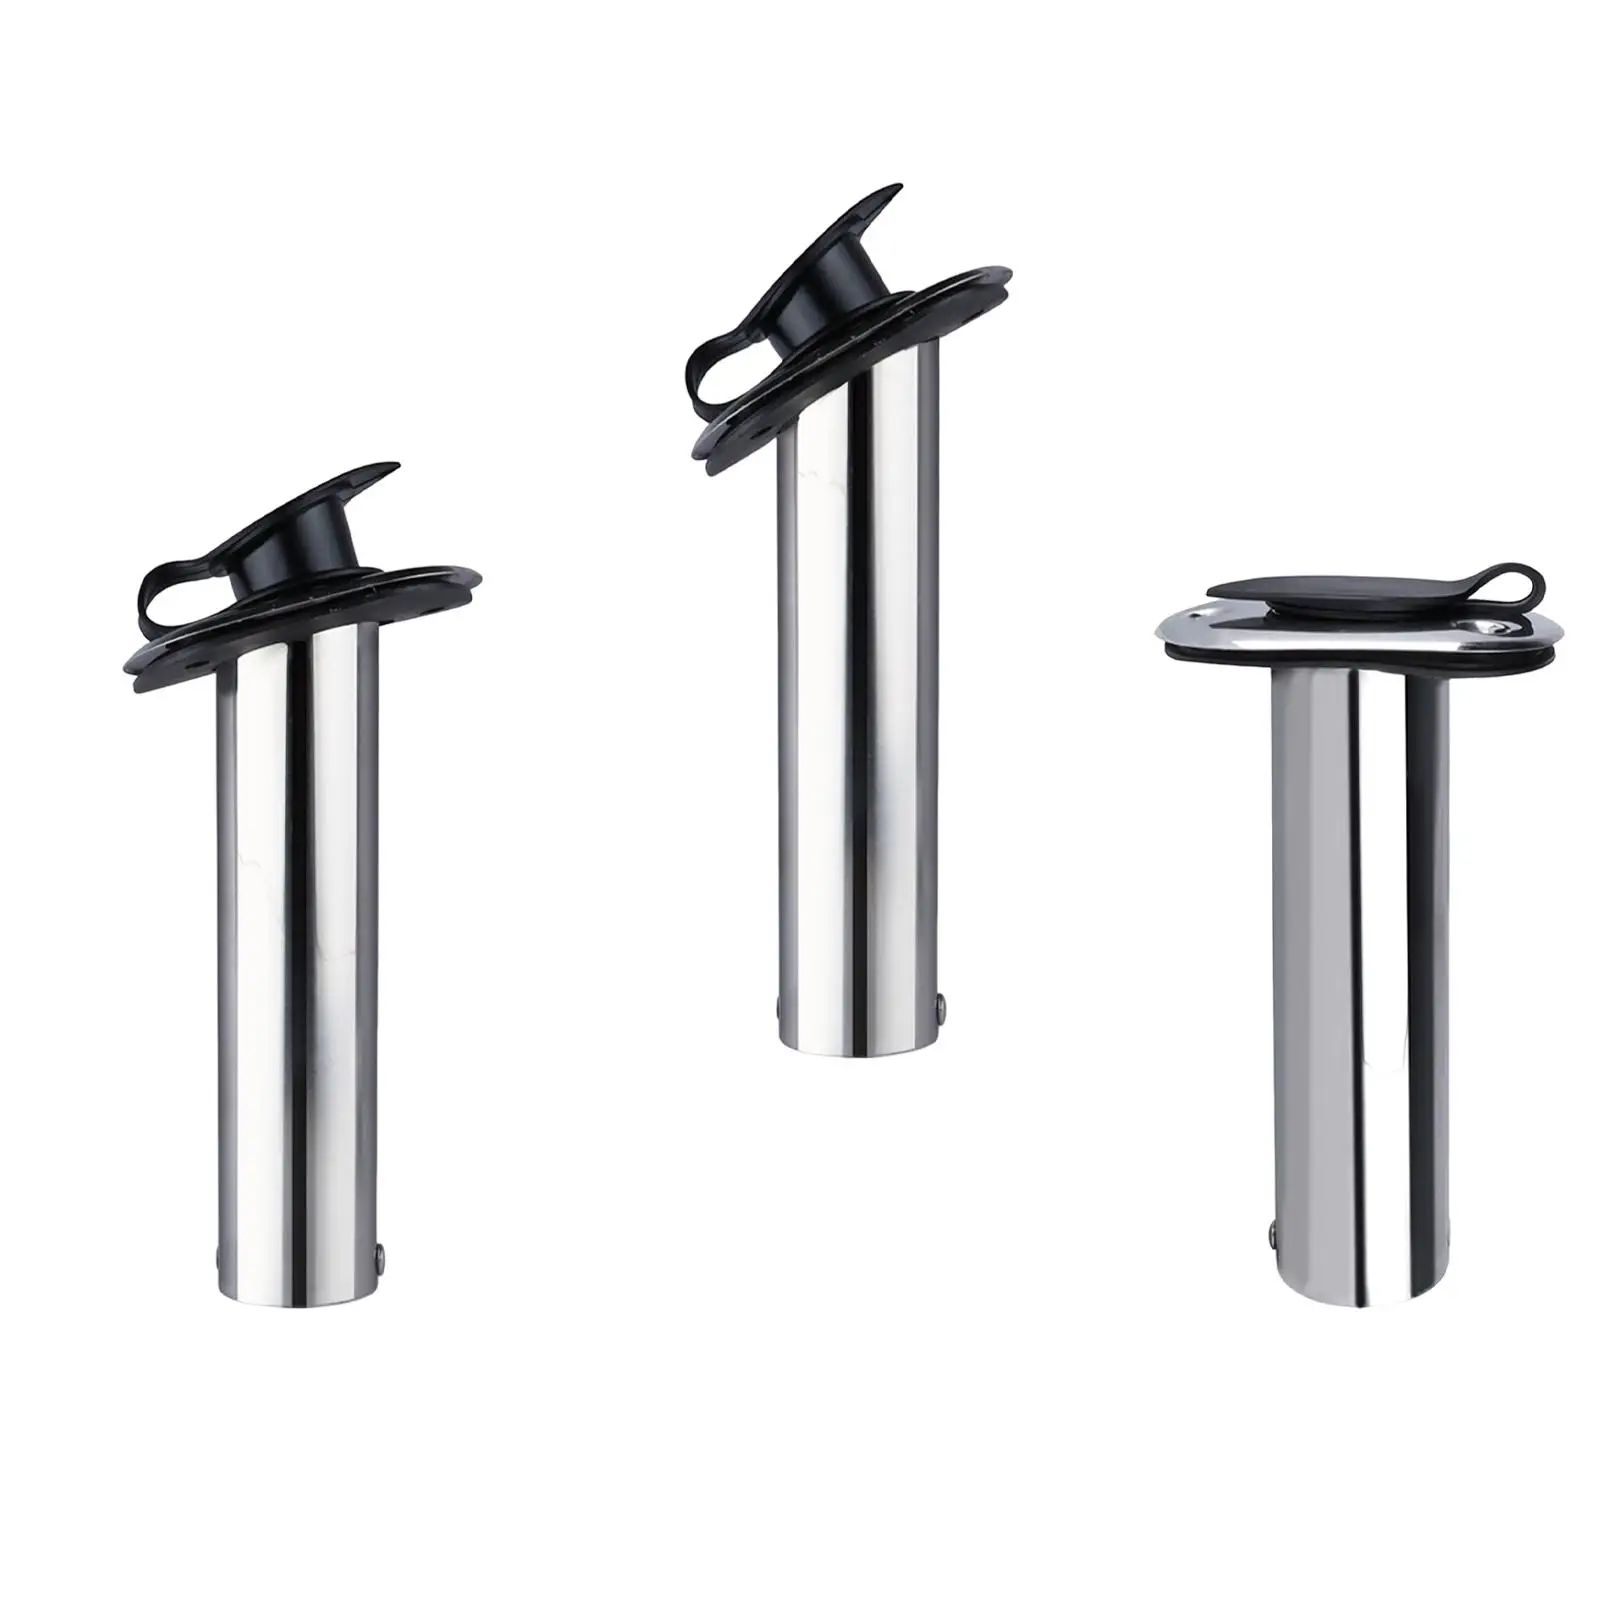 Fishing Rod Holder Flush Mount Boat Rod Holder Stainless Steel Fishing Tackle Tool Accessory for Fish Boat Yacht Marine Kayak